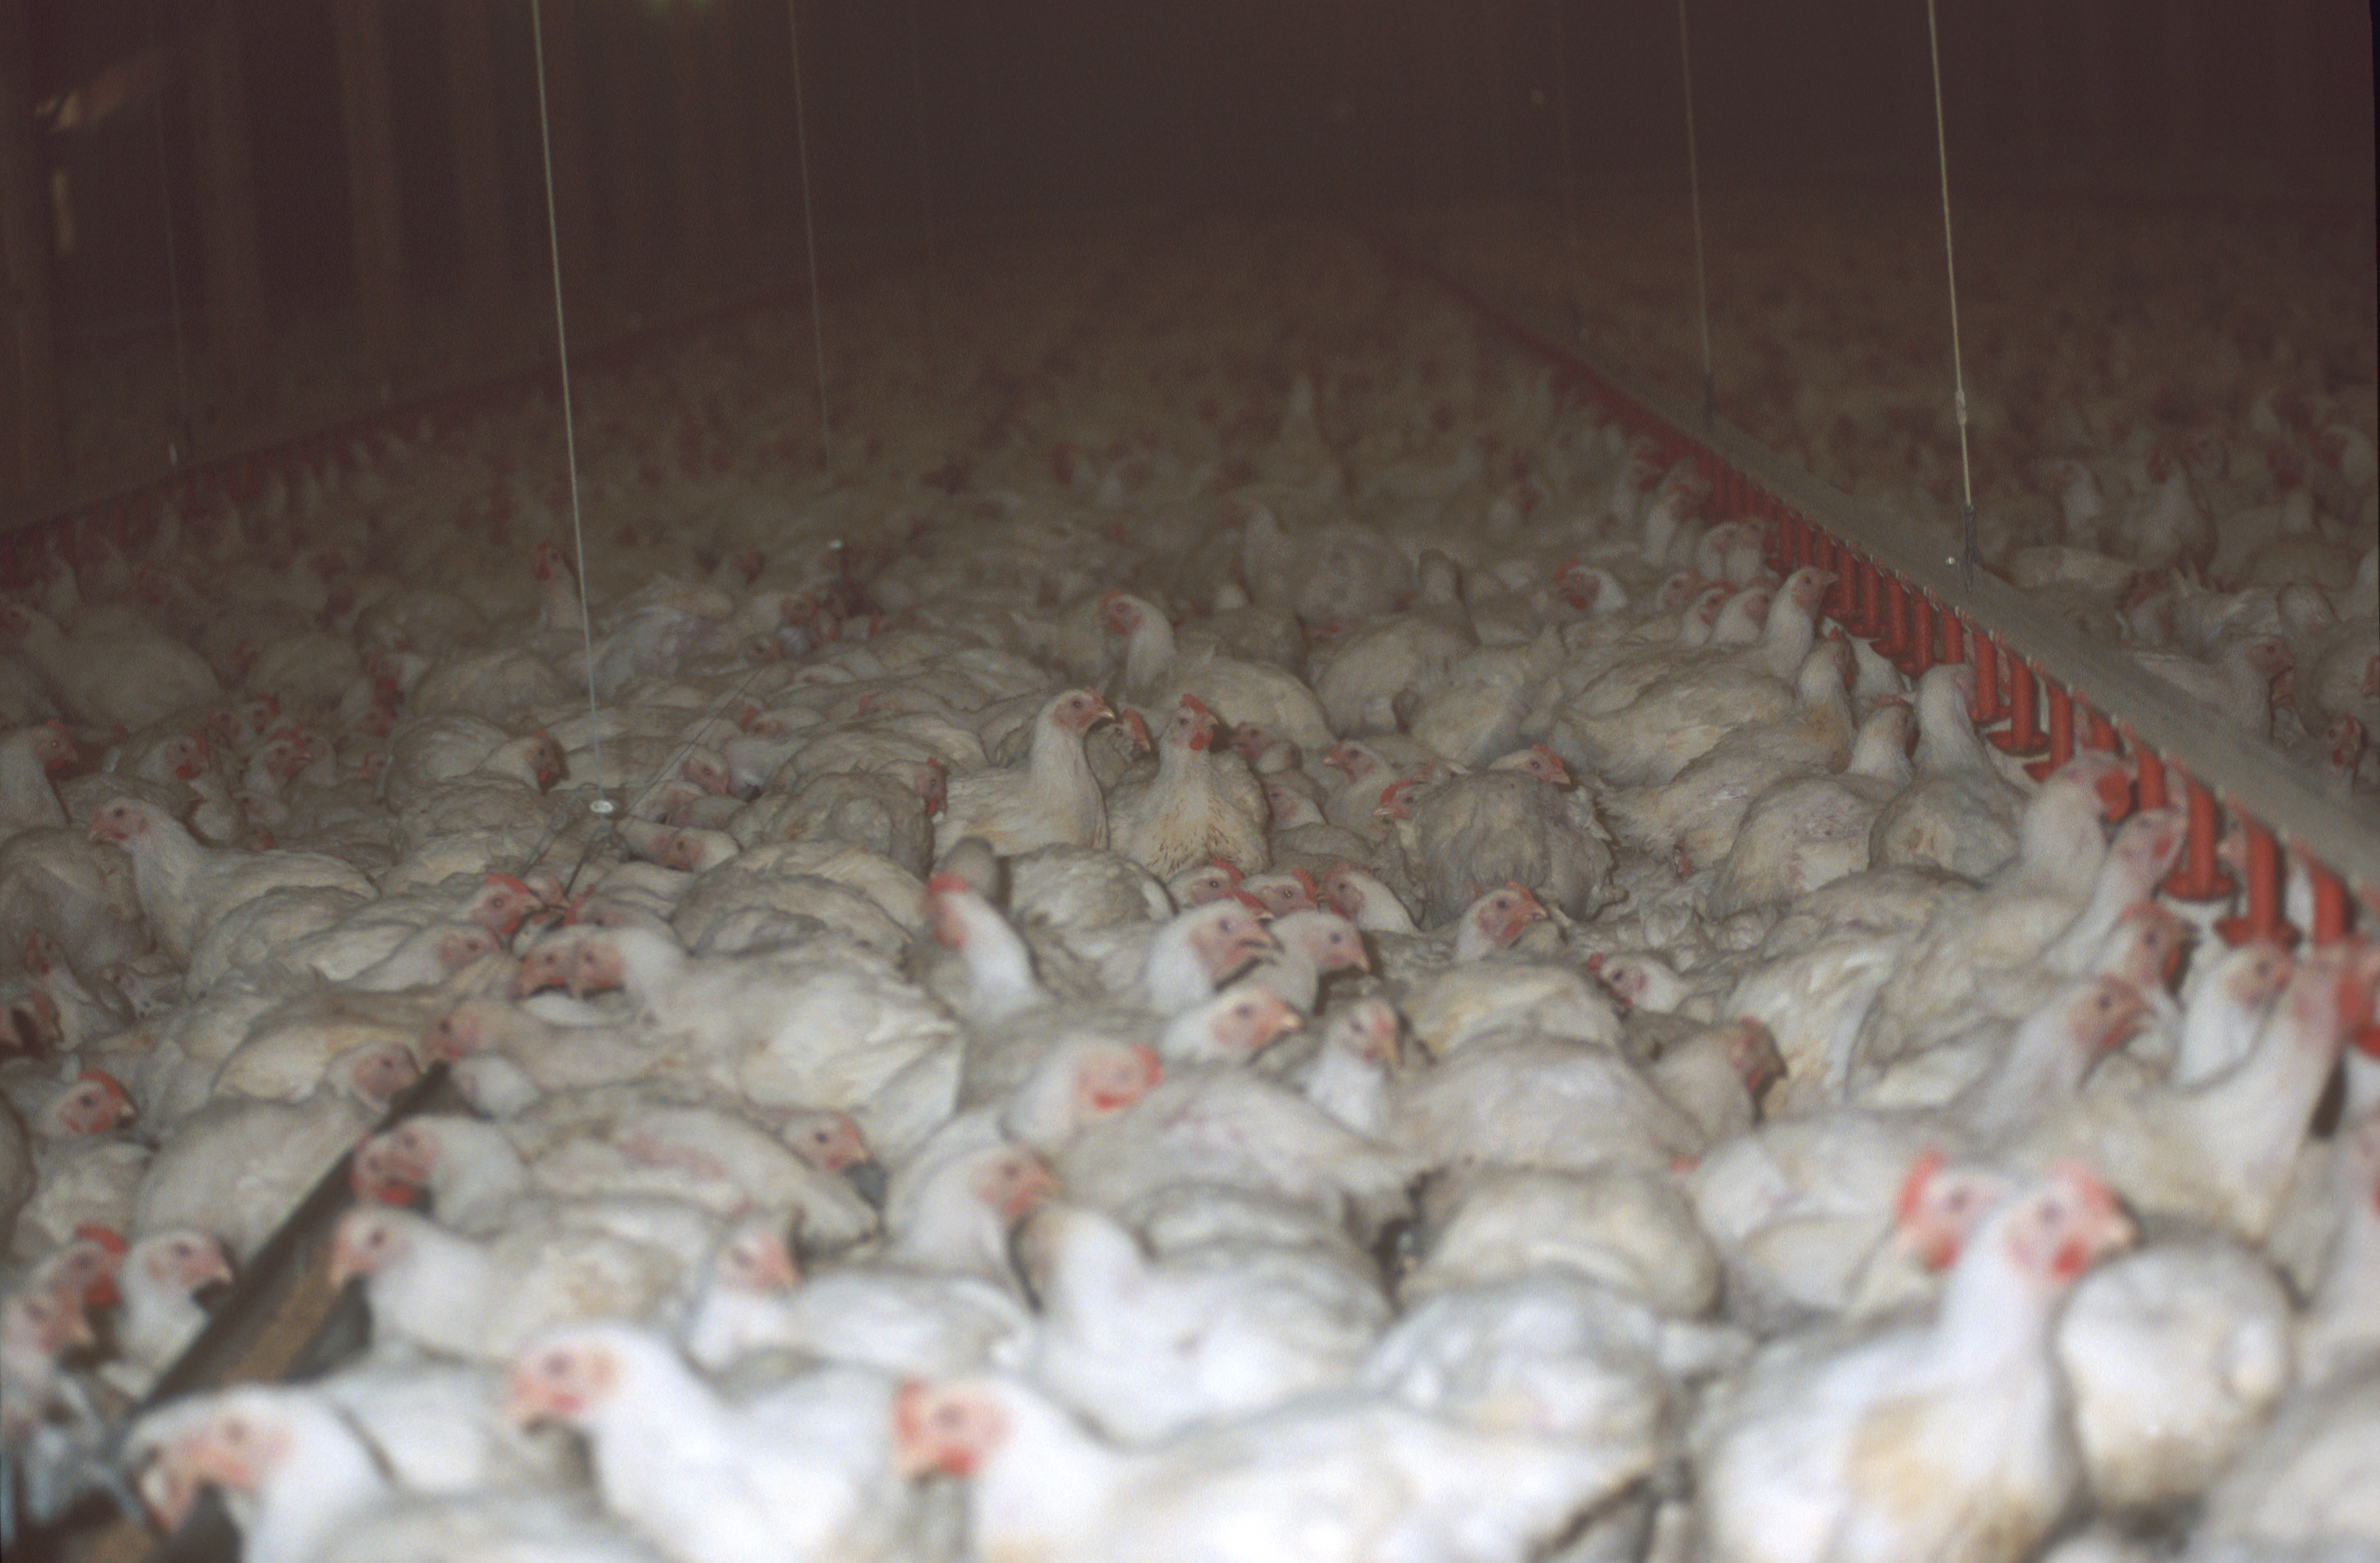 fast growing broiler chickens crammed in large shed © RSPCA